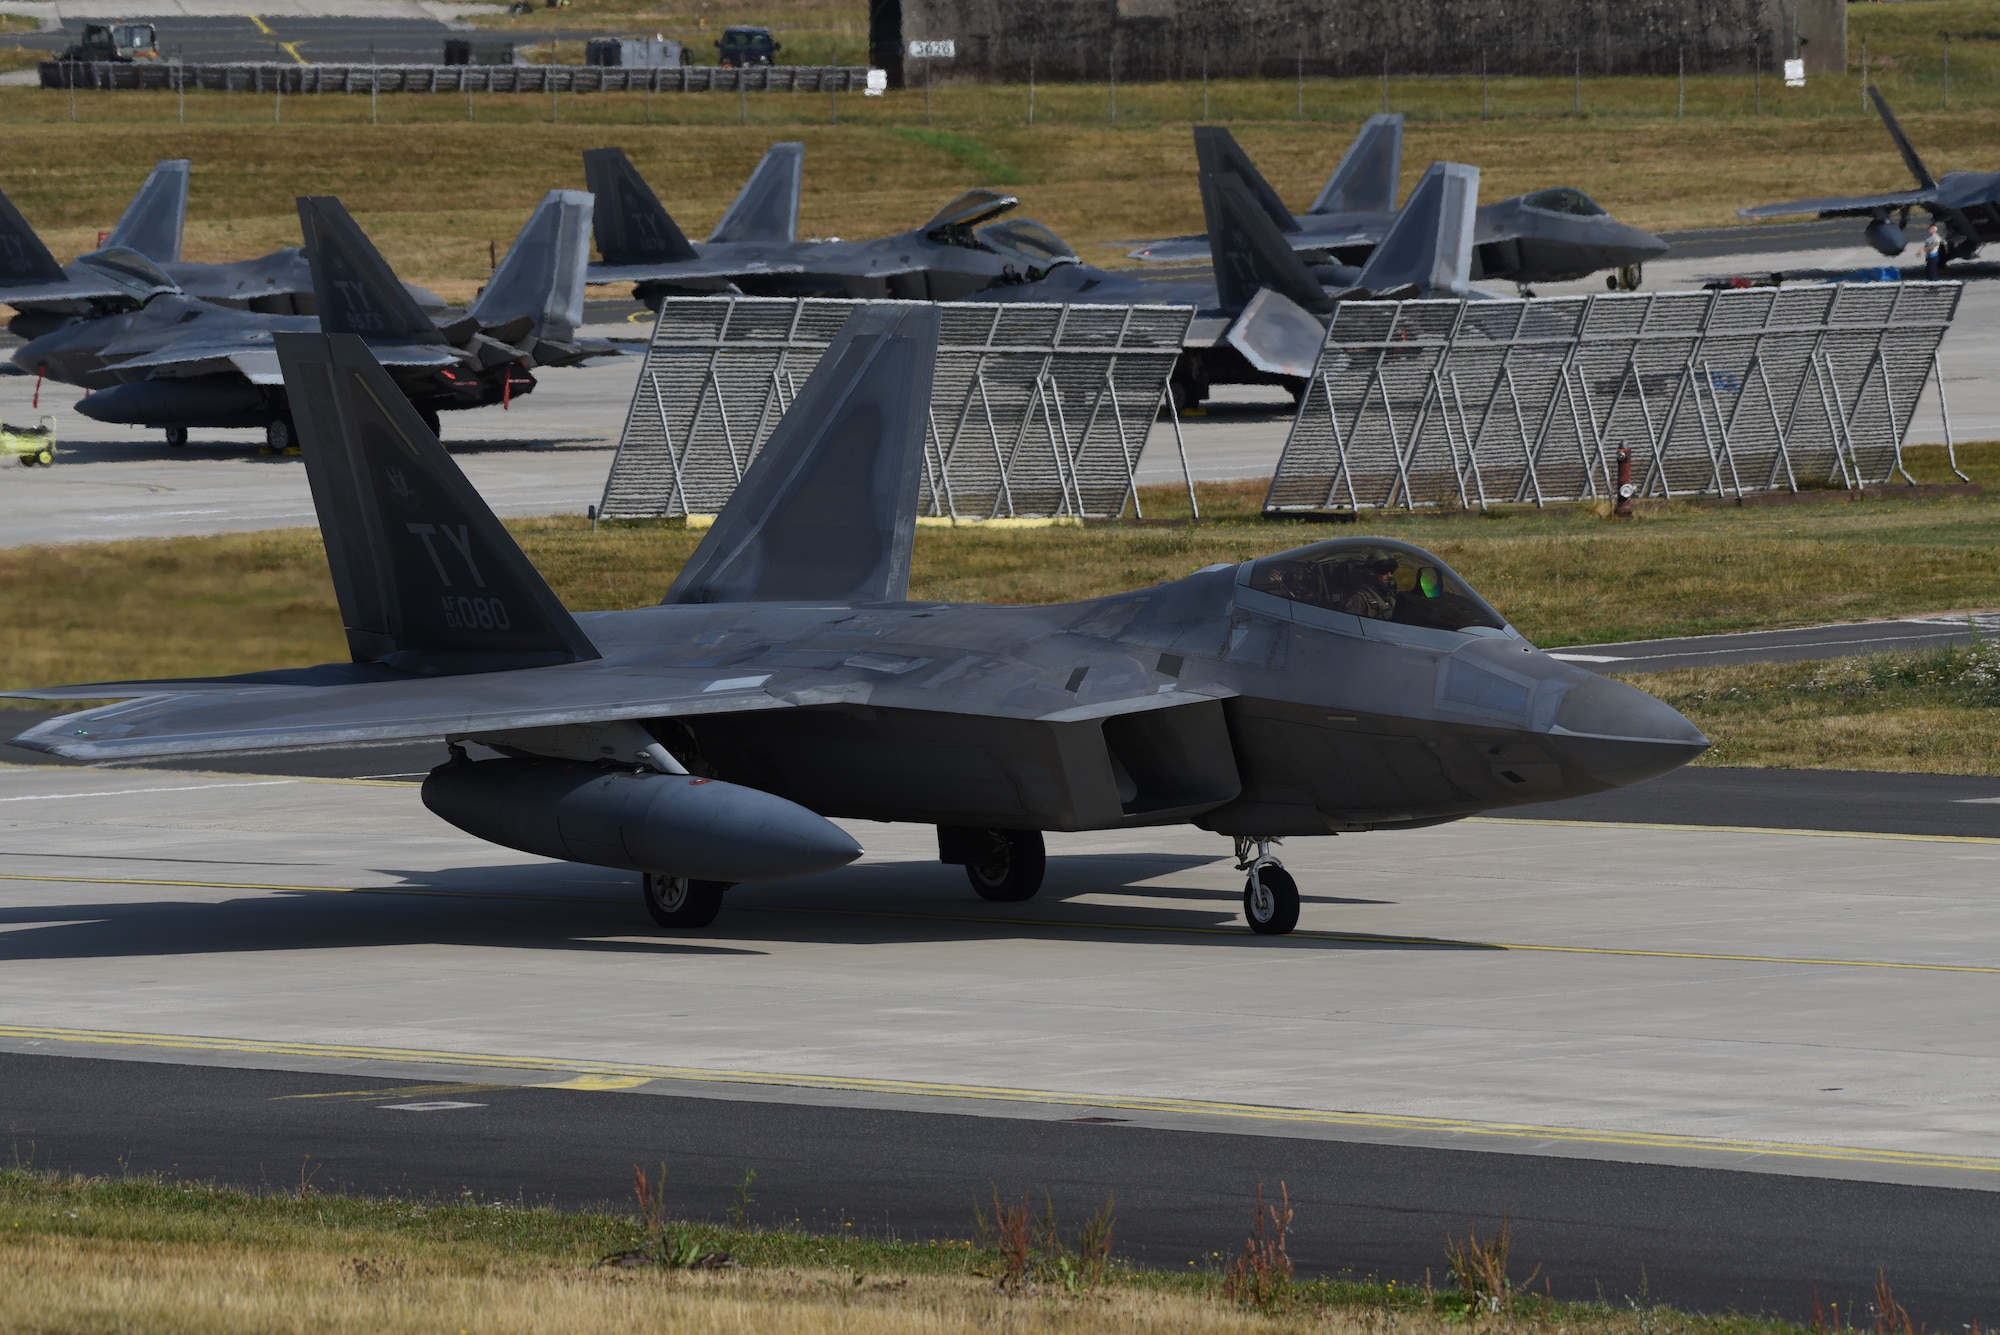 A U.S. Air Force F-22 Raptor from the 95th Fighter Squadron, 325th Fighter Wing, at Tyndall Air Force Base, Fla., taxis on the flightline at Spangdahlem Air Base, Germany, Aug. 29, 2018. The F-22s are heading back home after completing a Flying Training Deployment with other NATO partners. (U.S. Air Force photo by Airman 1st Class Branden Rae)